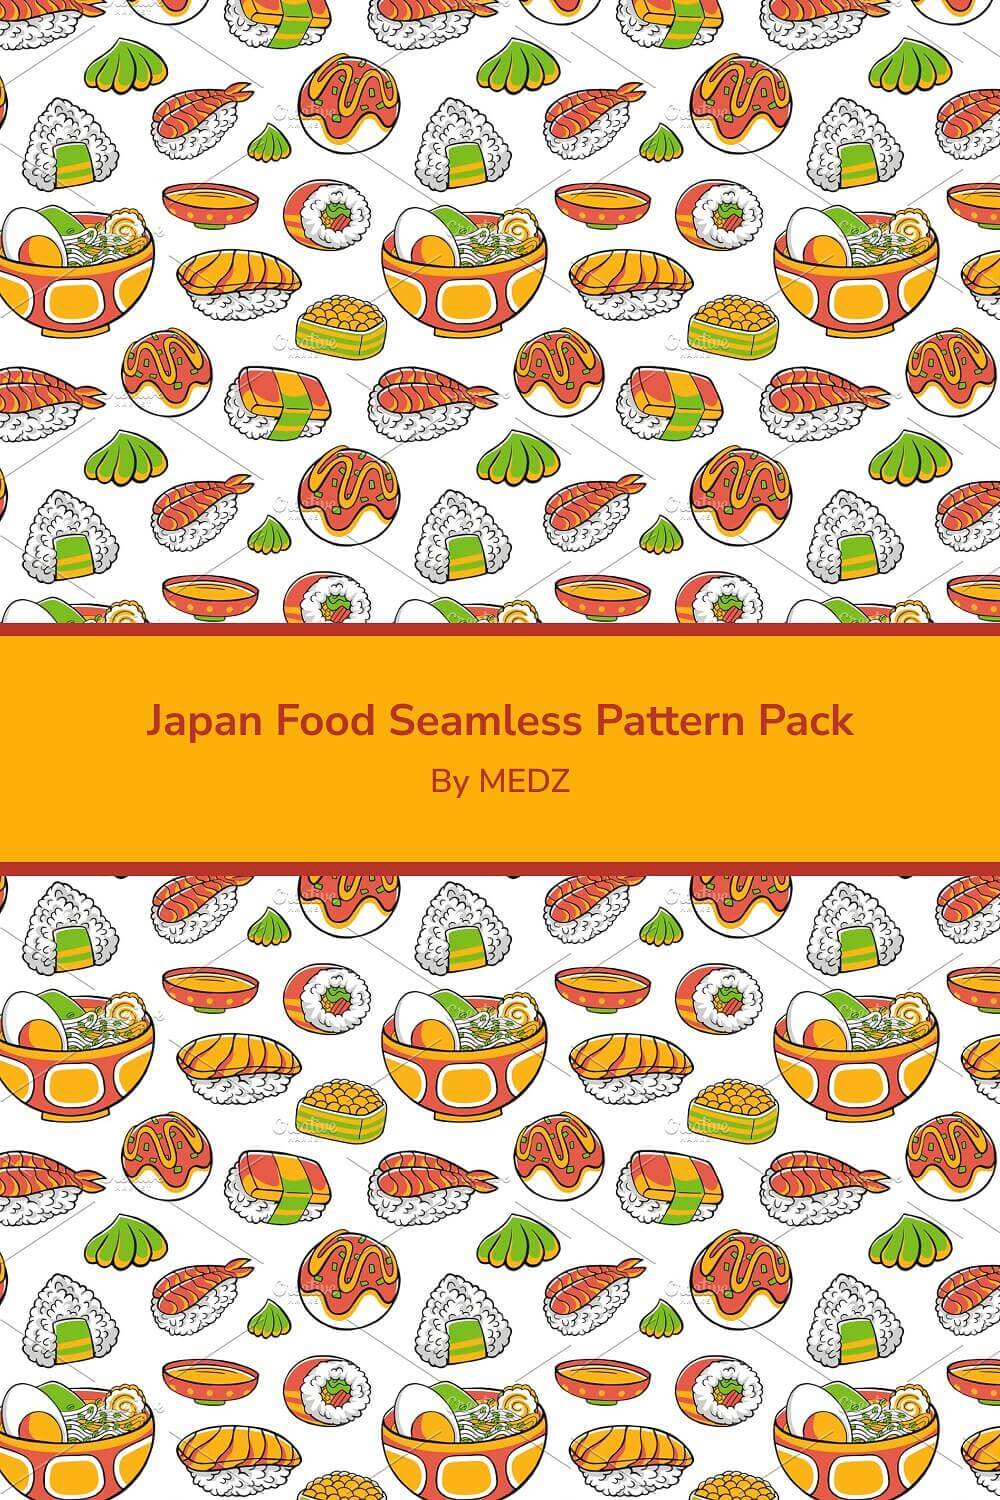 Pattern with sushi, wasabi and other Japanese food.